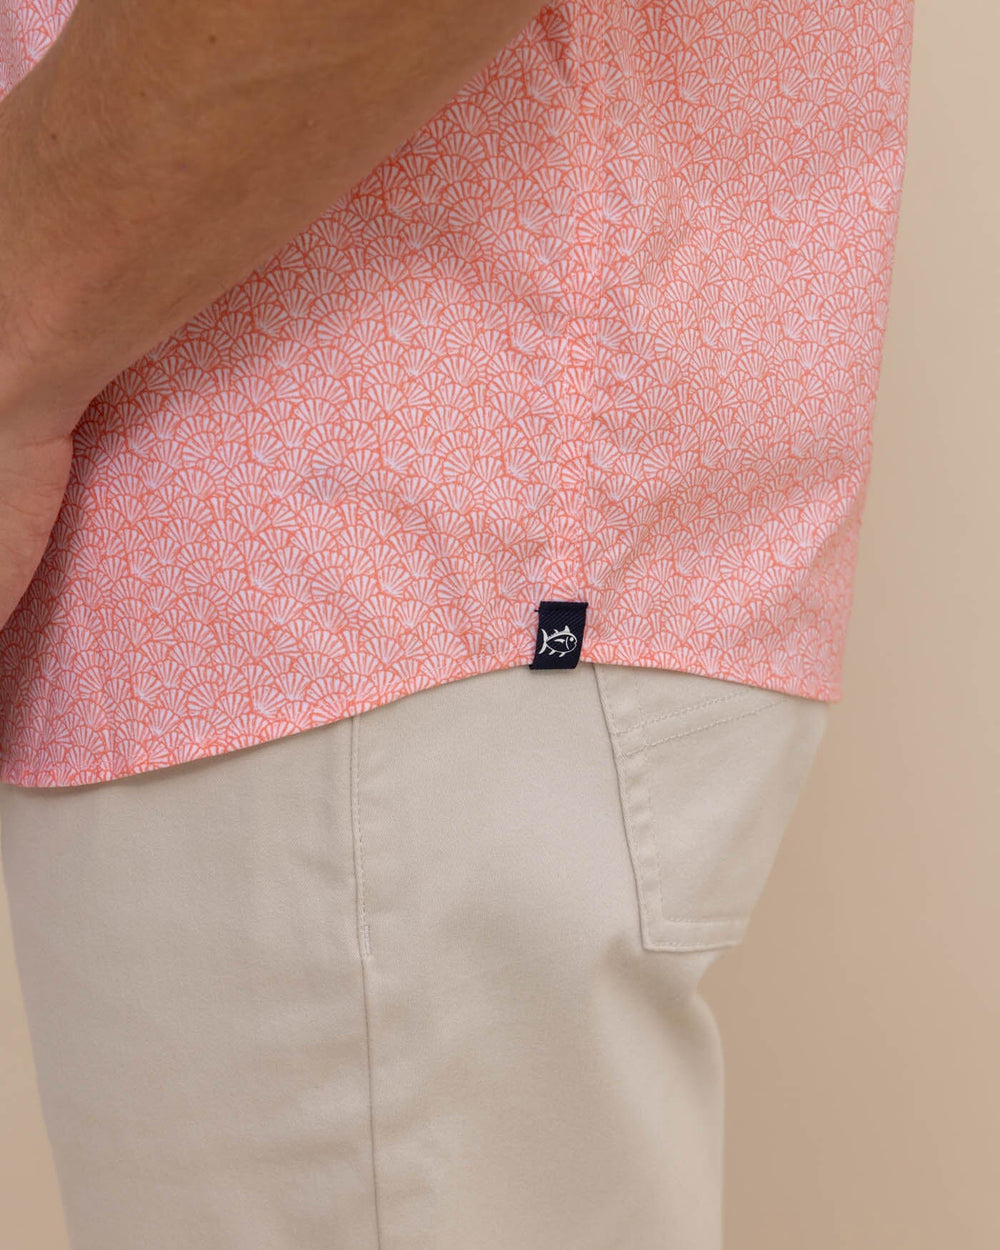 The detail view of the Southern Tide brrr Intercoastal What the Shell Short Sleeve Sportshirt by Southern Tide - Conch Shell